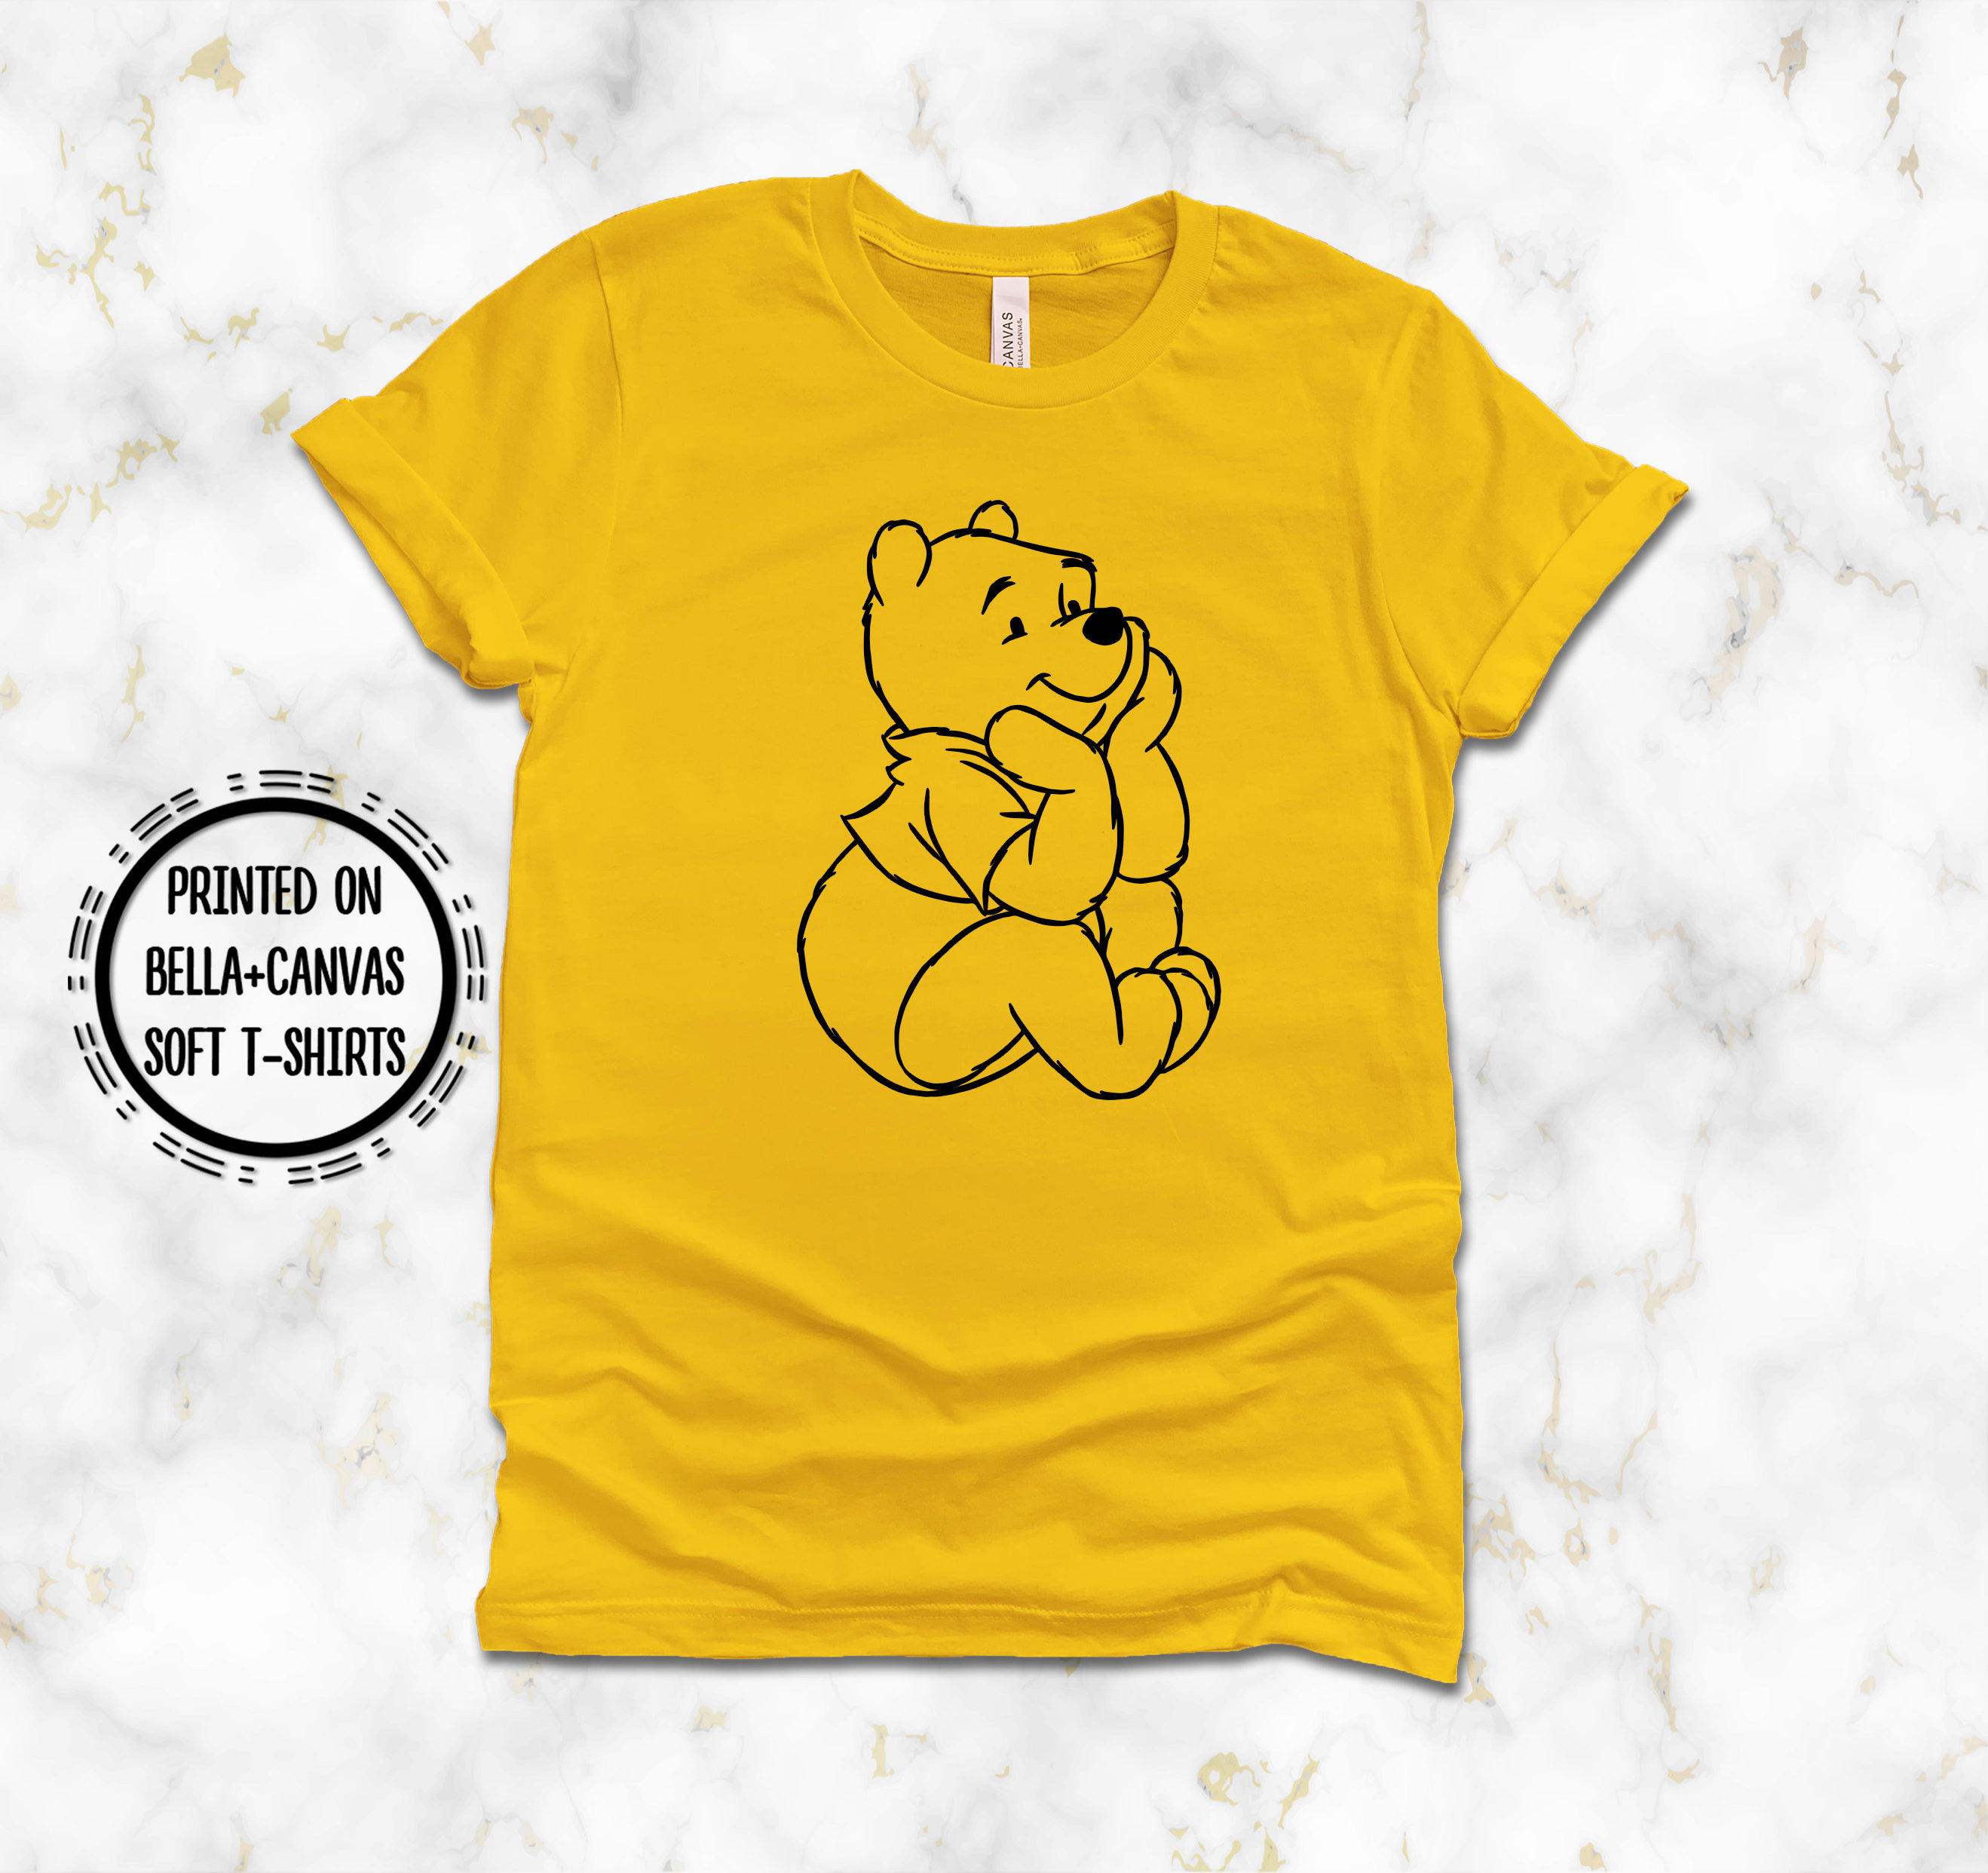 Pooh Outline T-shirt, Printed on Bella Canvas T-shirts, Winnie the Pooh and  Friends Cartoon Outline Print, Adult Unisex, Gold Color Tee - Etsy